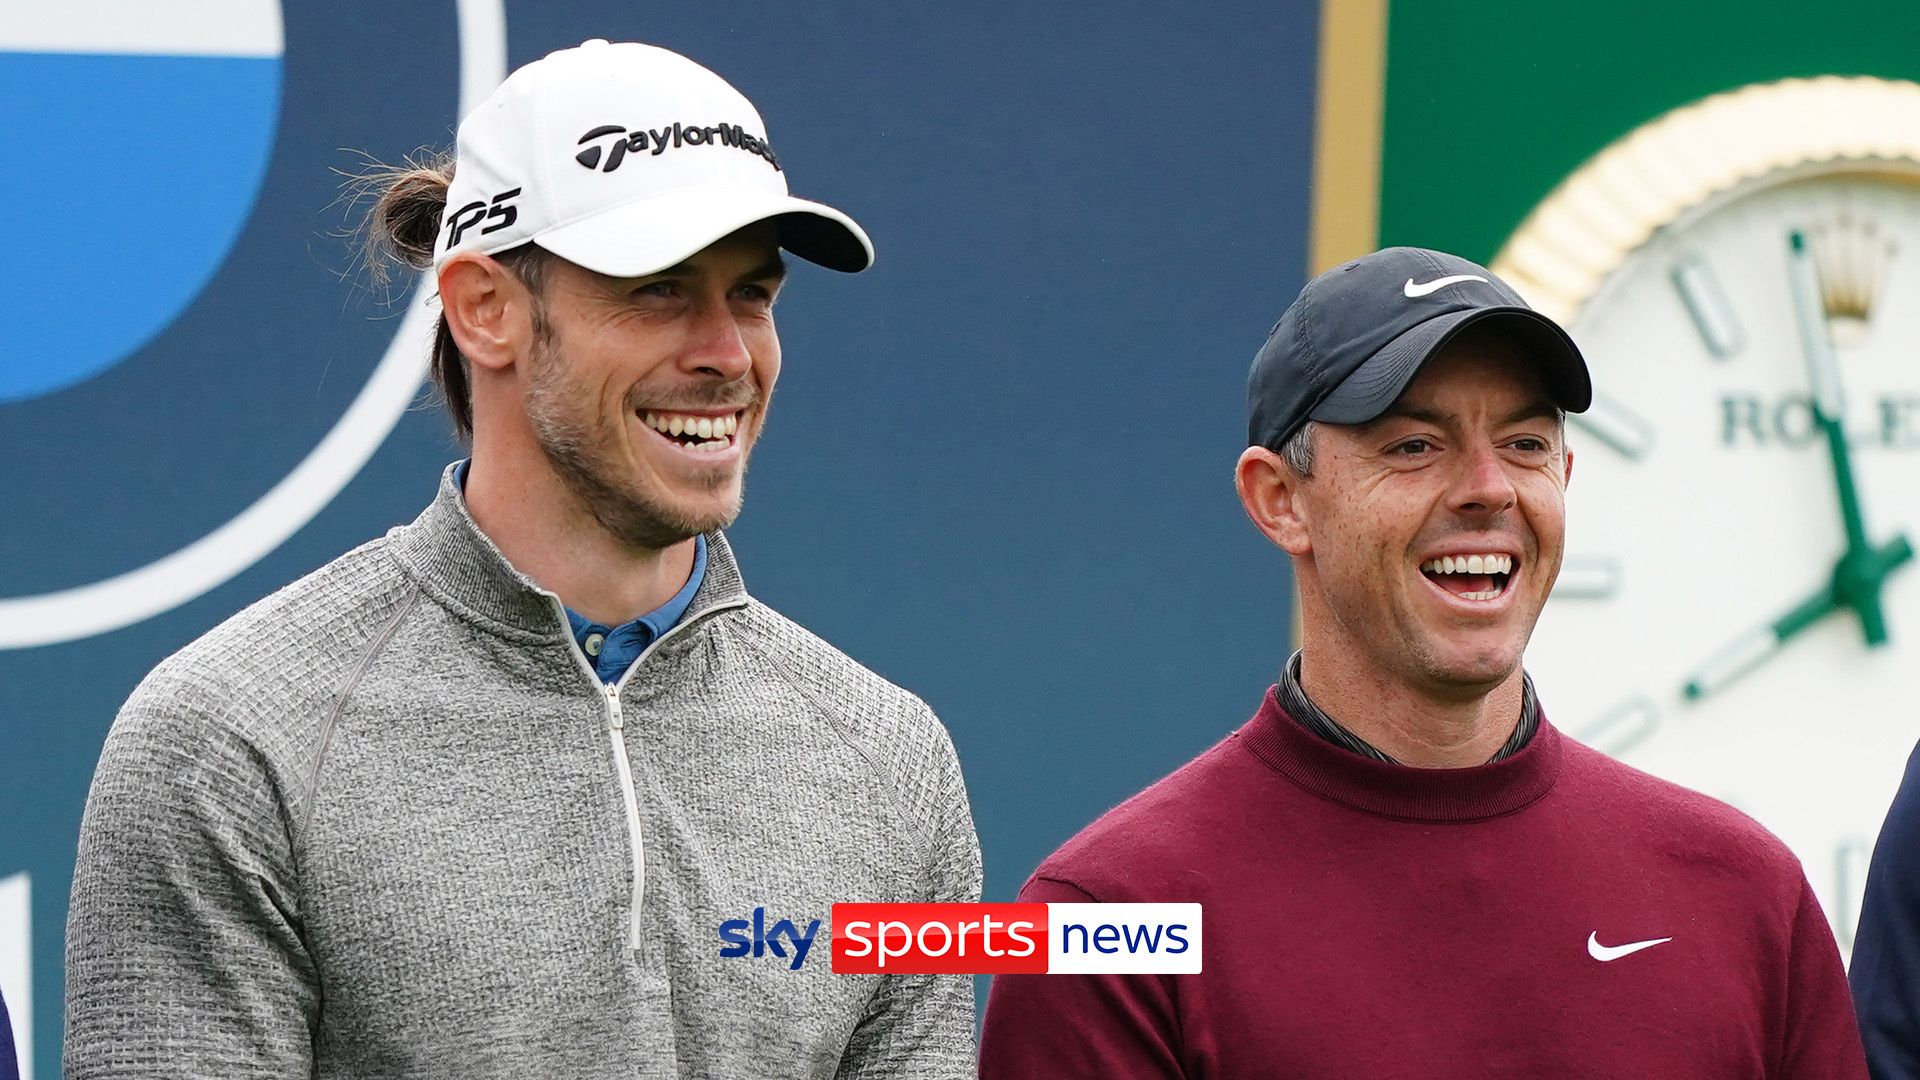 'I want to impress him!' | Bale's first tee nerves paired with McIlroy